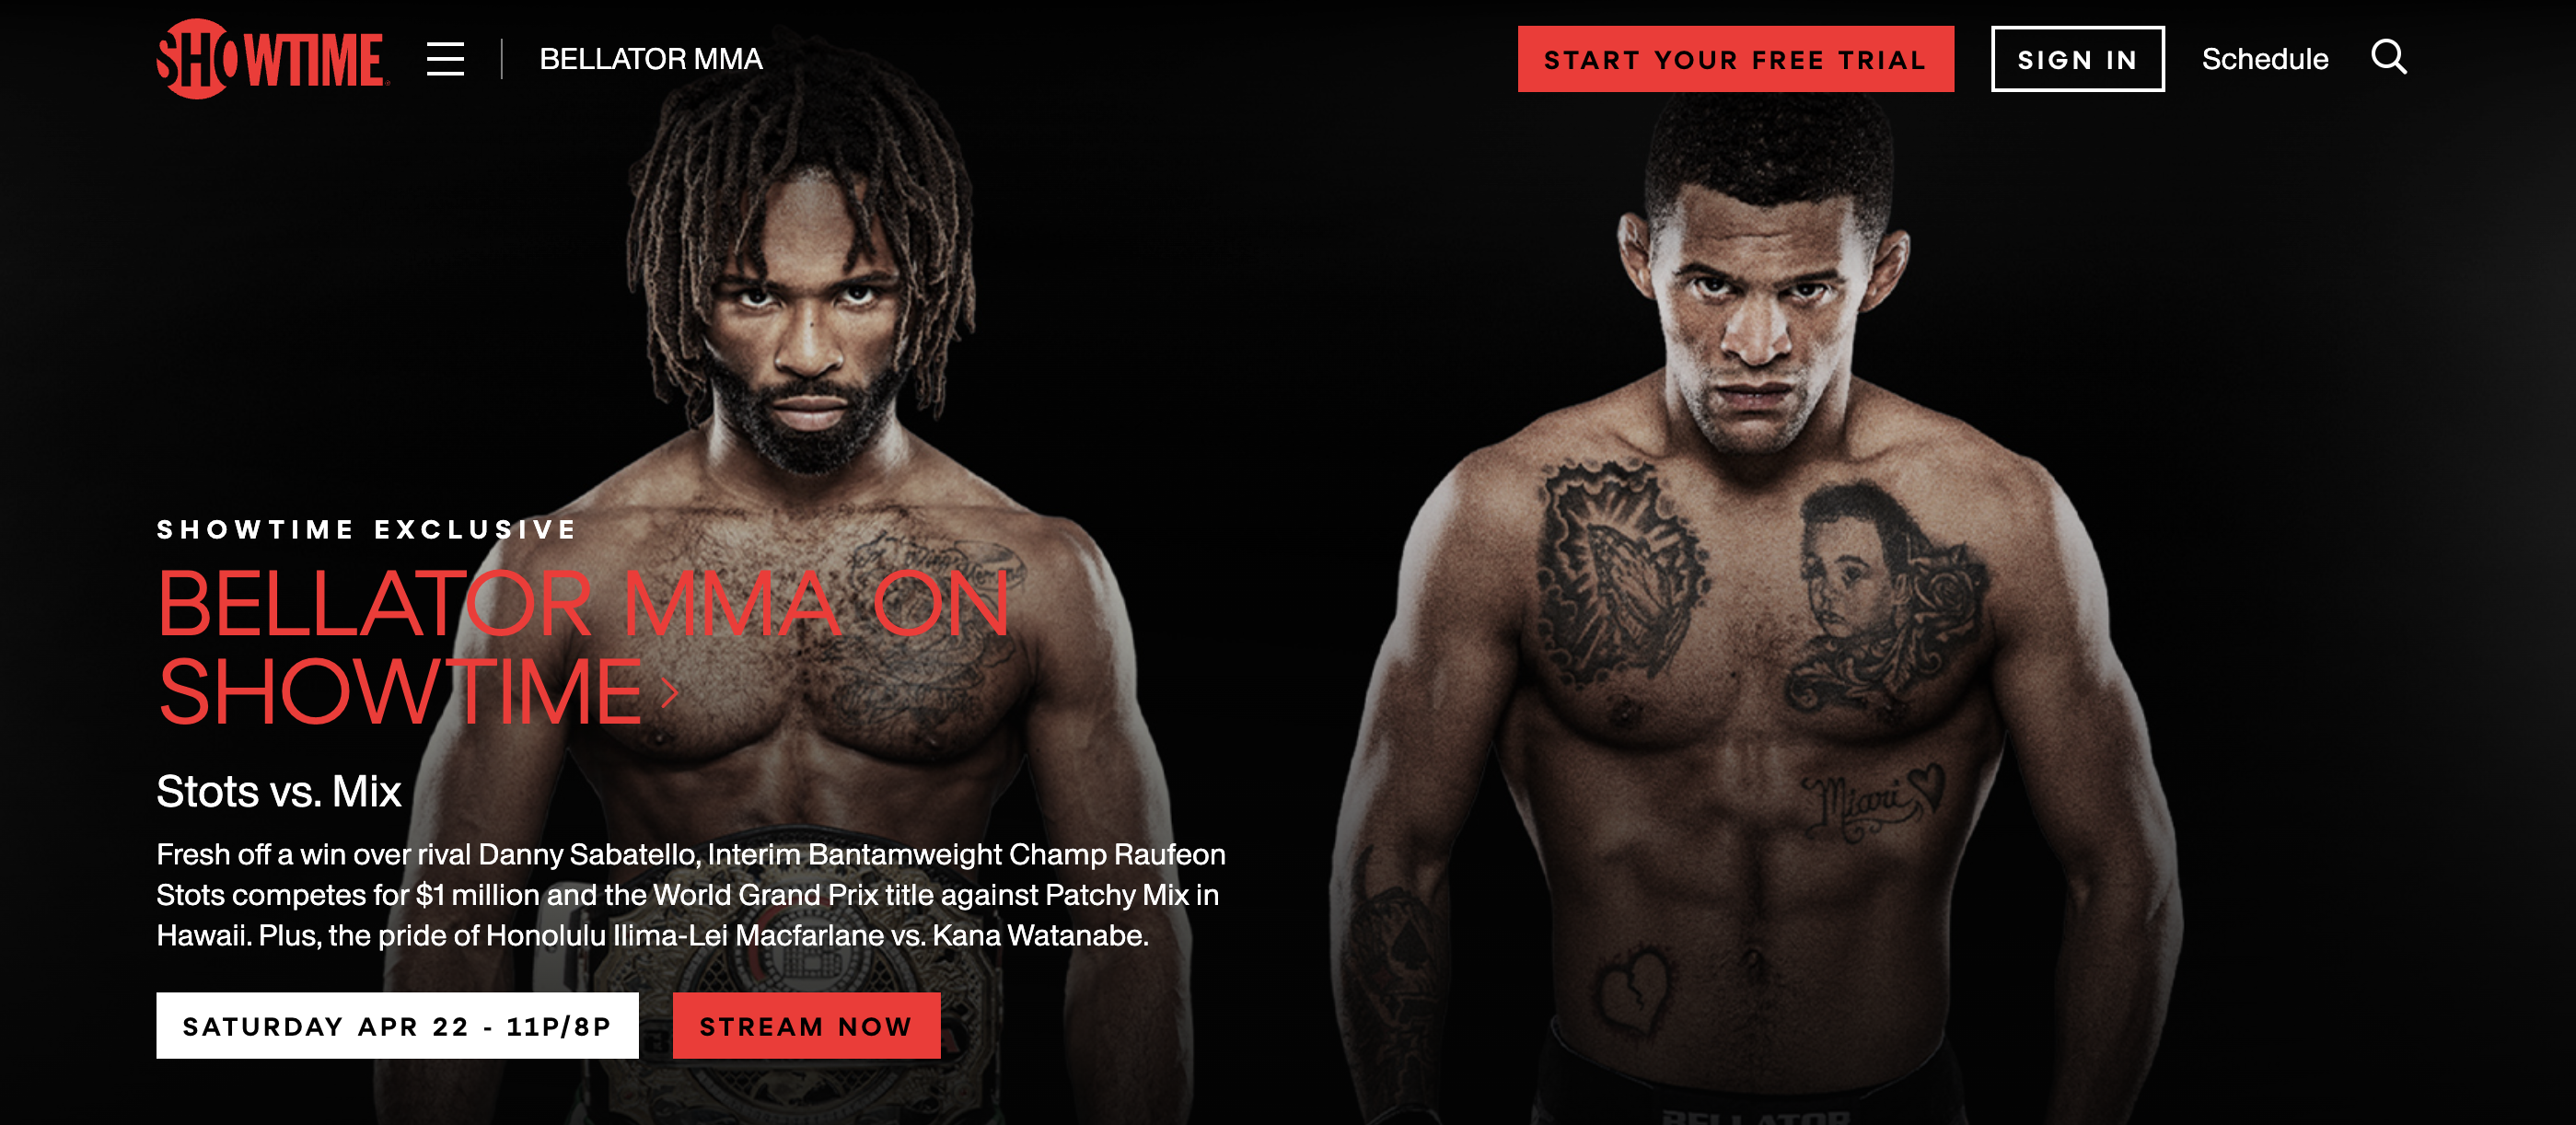 how to watch bellator free showtime